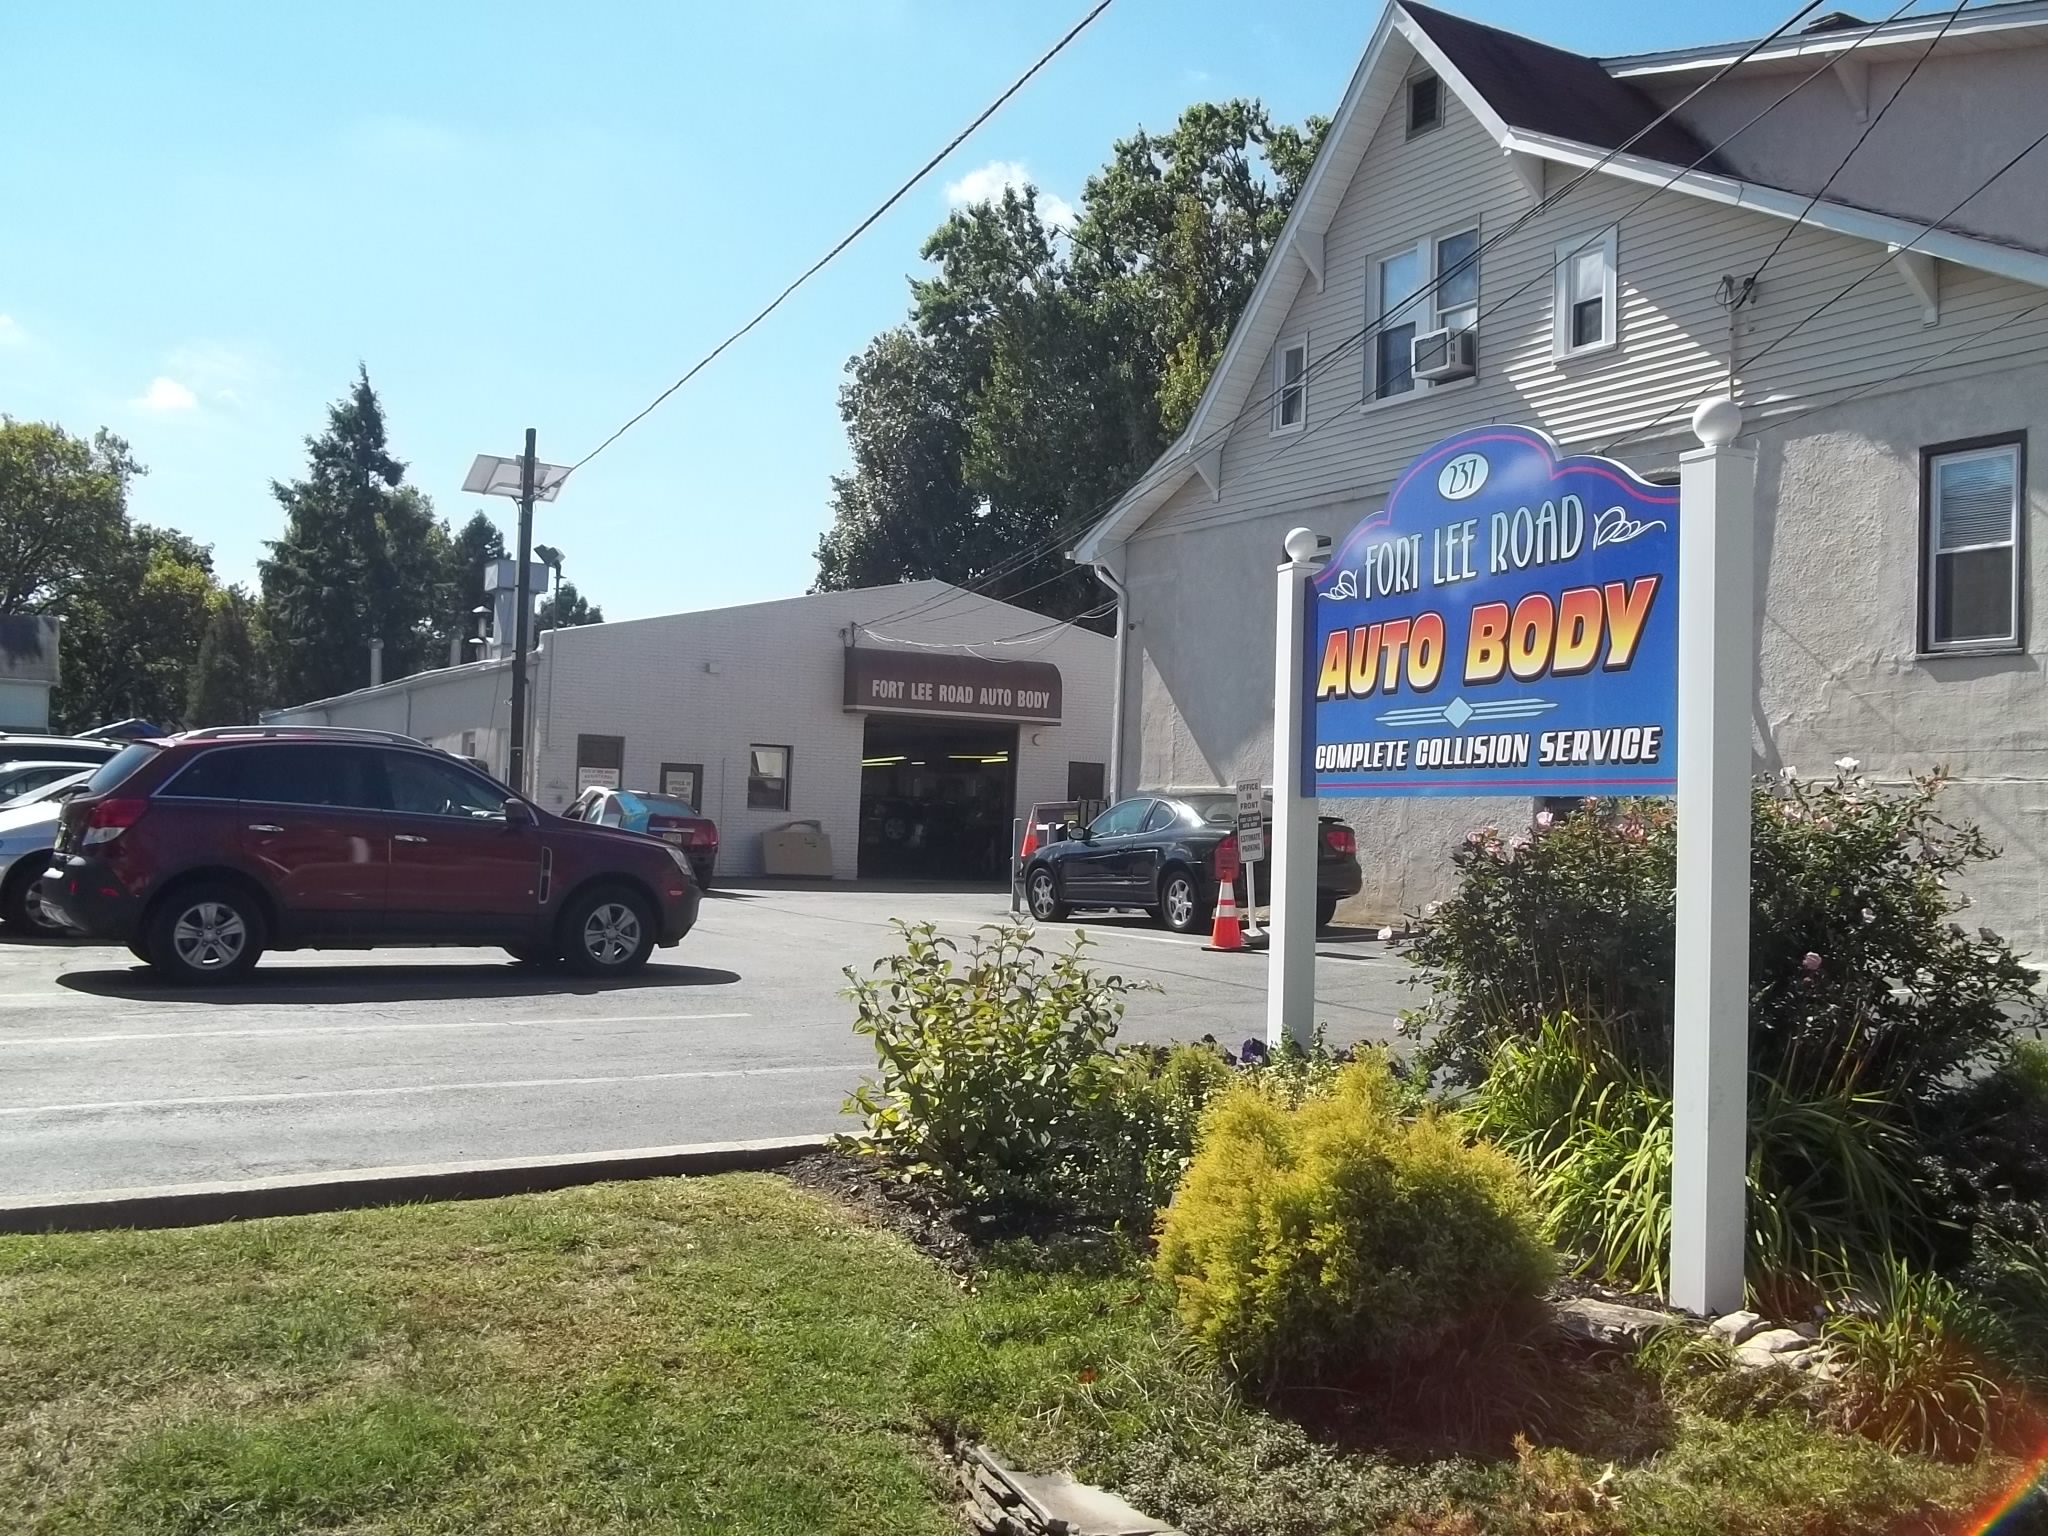 FOR IMMEDIATE RELEASE: Enhanced Quality and Safety Assurances for Customers  of Fort Lee Road Auto Body - Certified Collision Care News